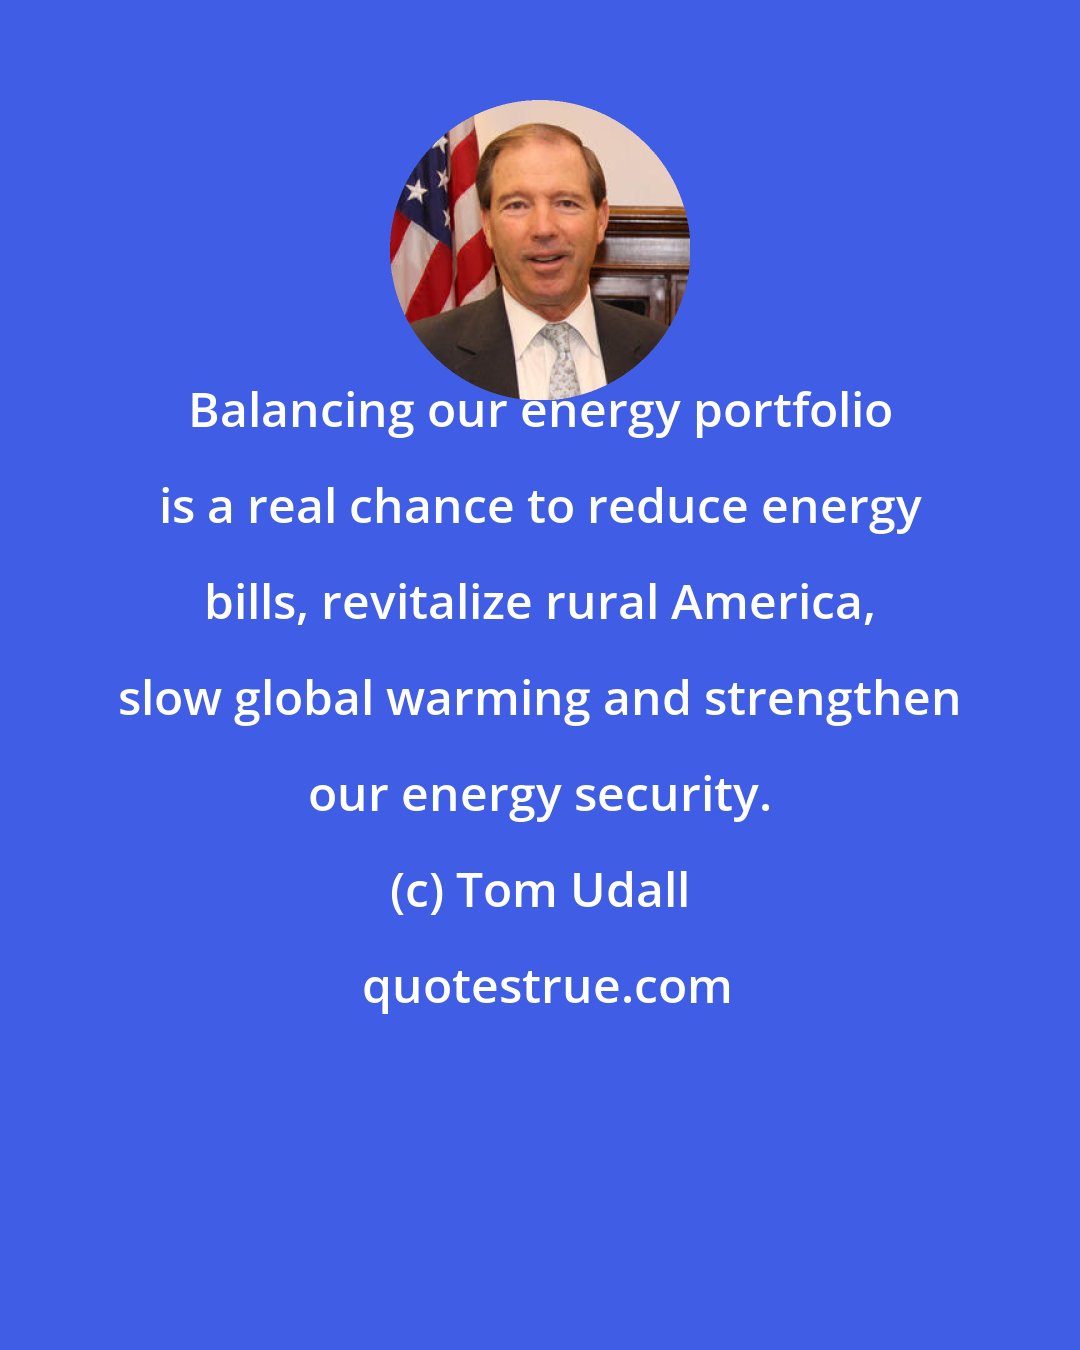 Tom Udall: Balancing our energy portfolio is a real chance to reduce energy bills, revitalize rural America, slow global warming and strengthen our energy security.